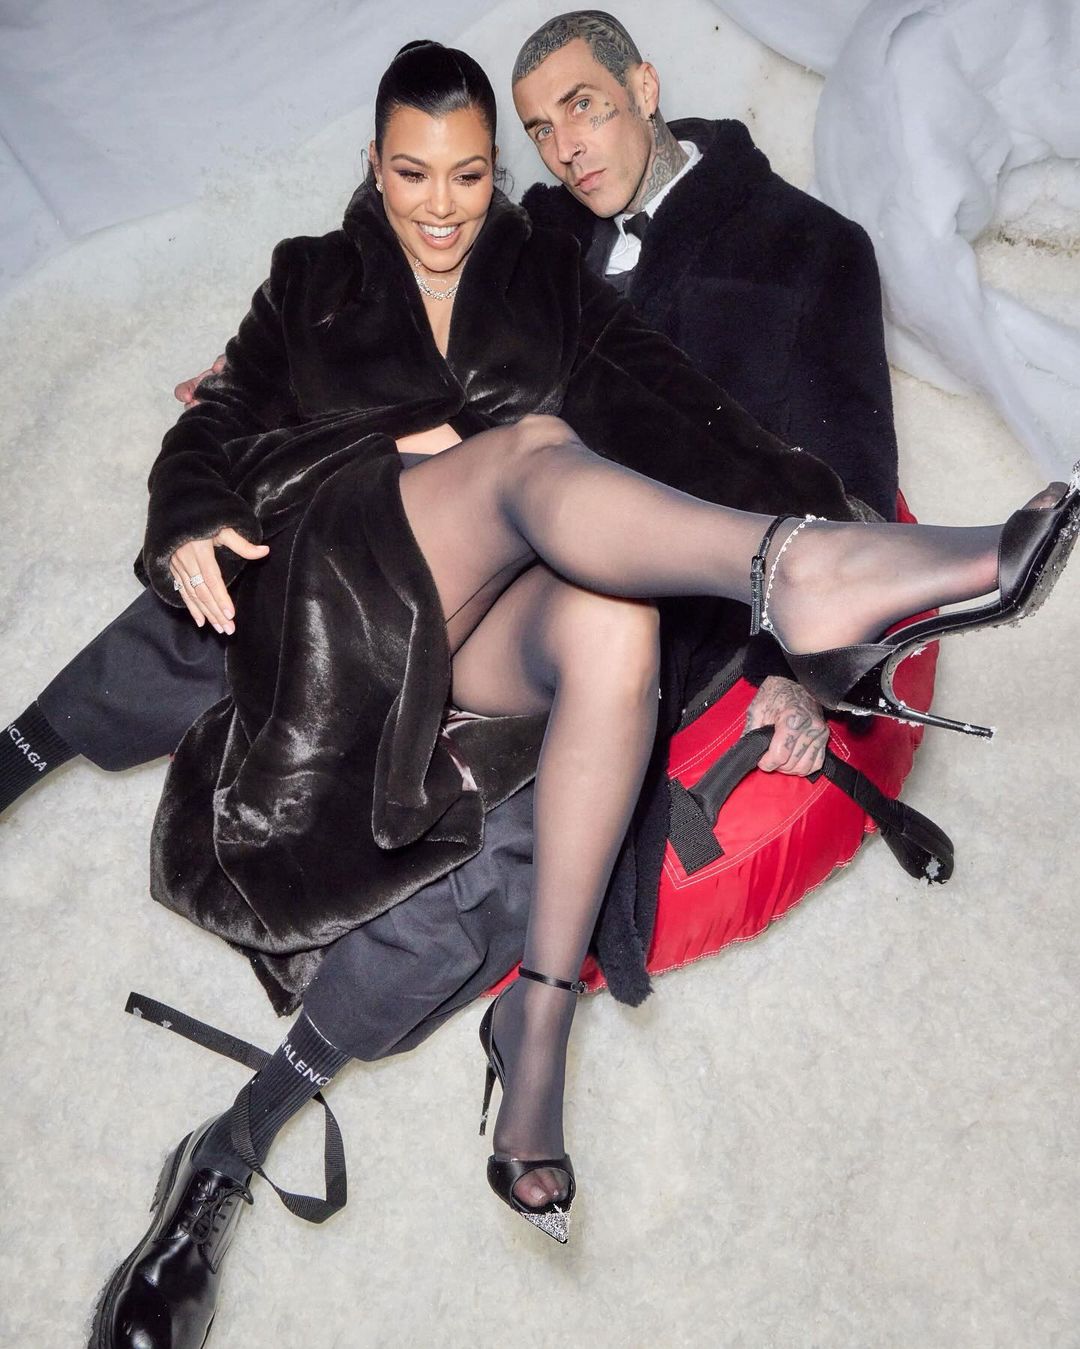 Kourtney and her rock star hubby looked very fashionable as they attended her sister Kim Kardashian's holiday party